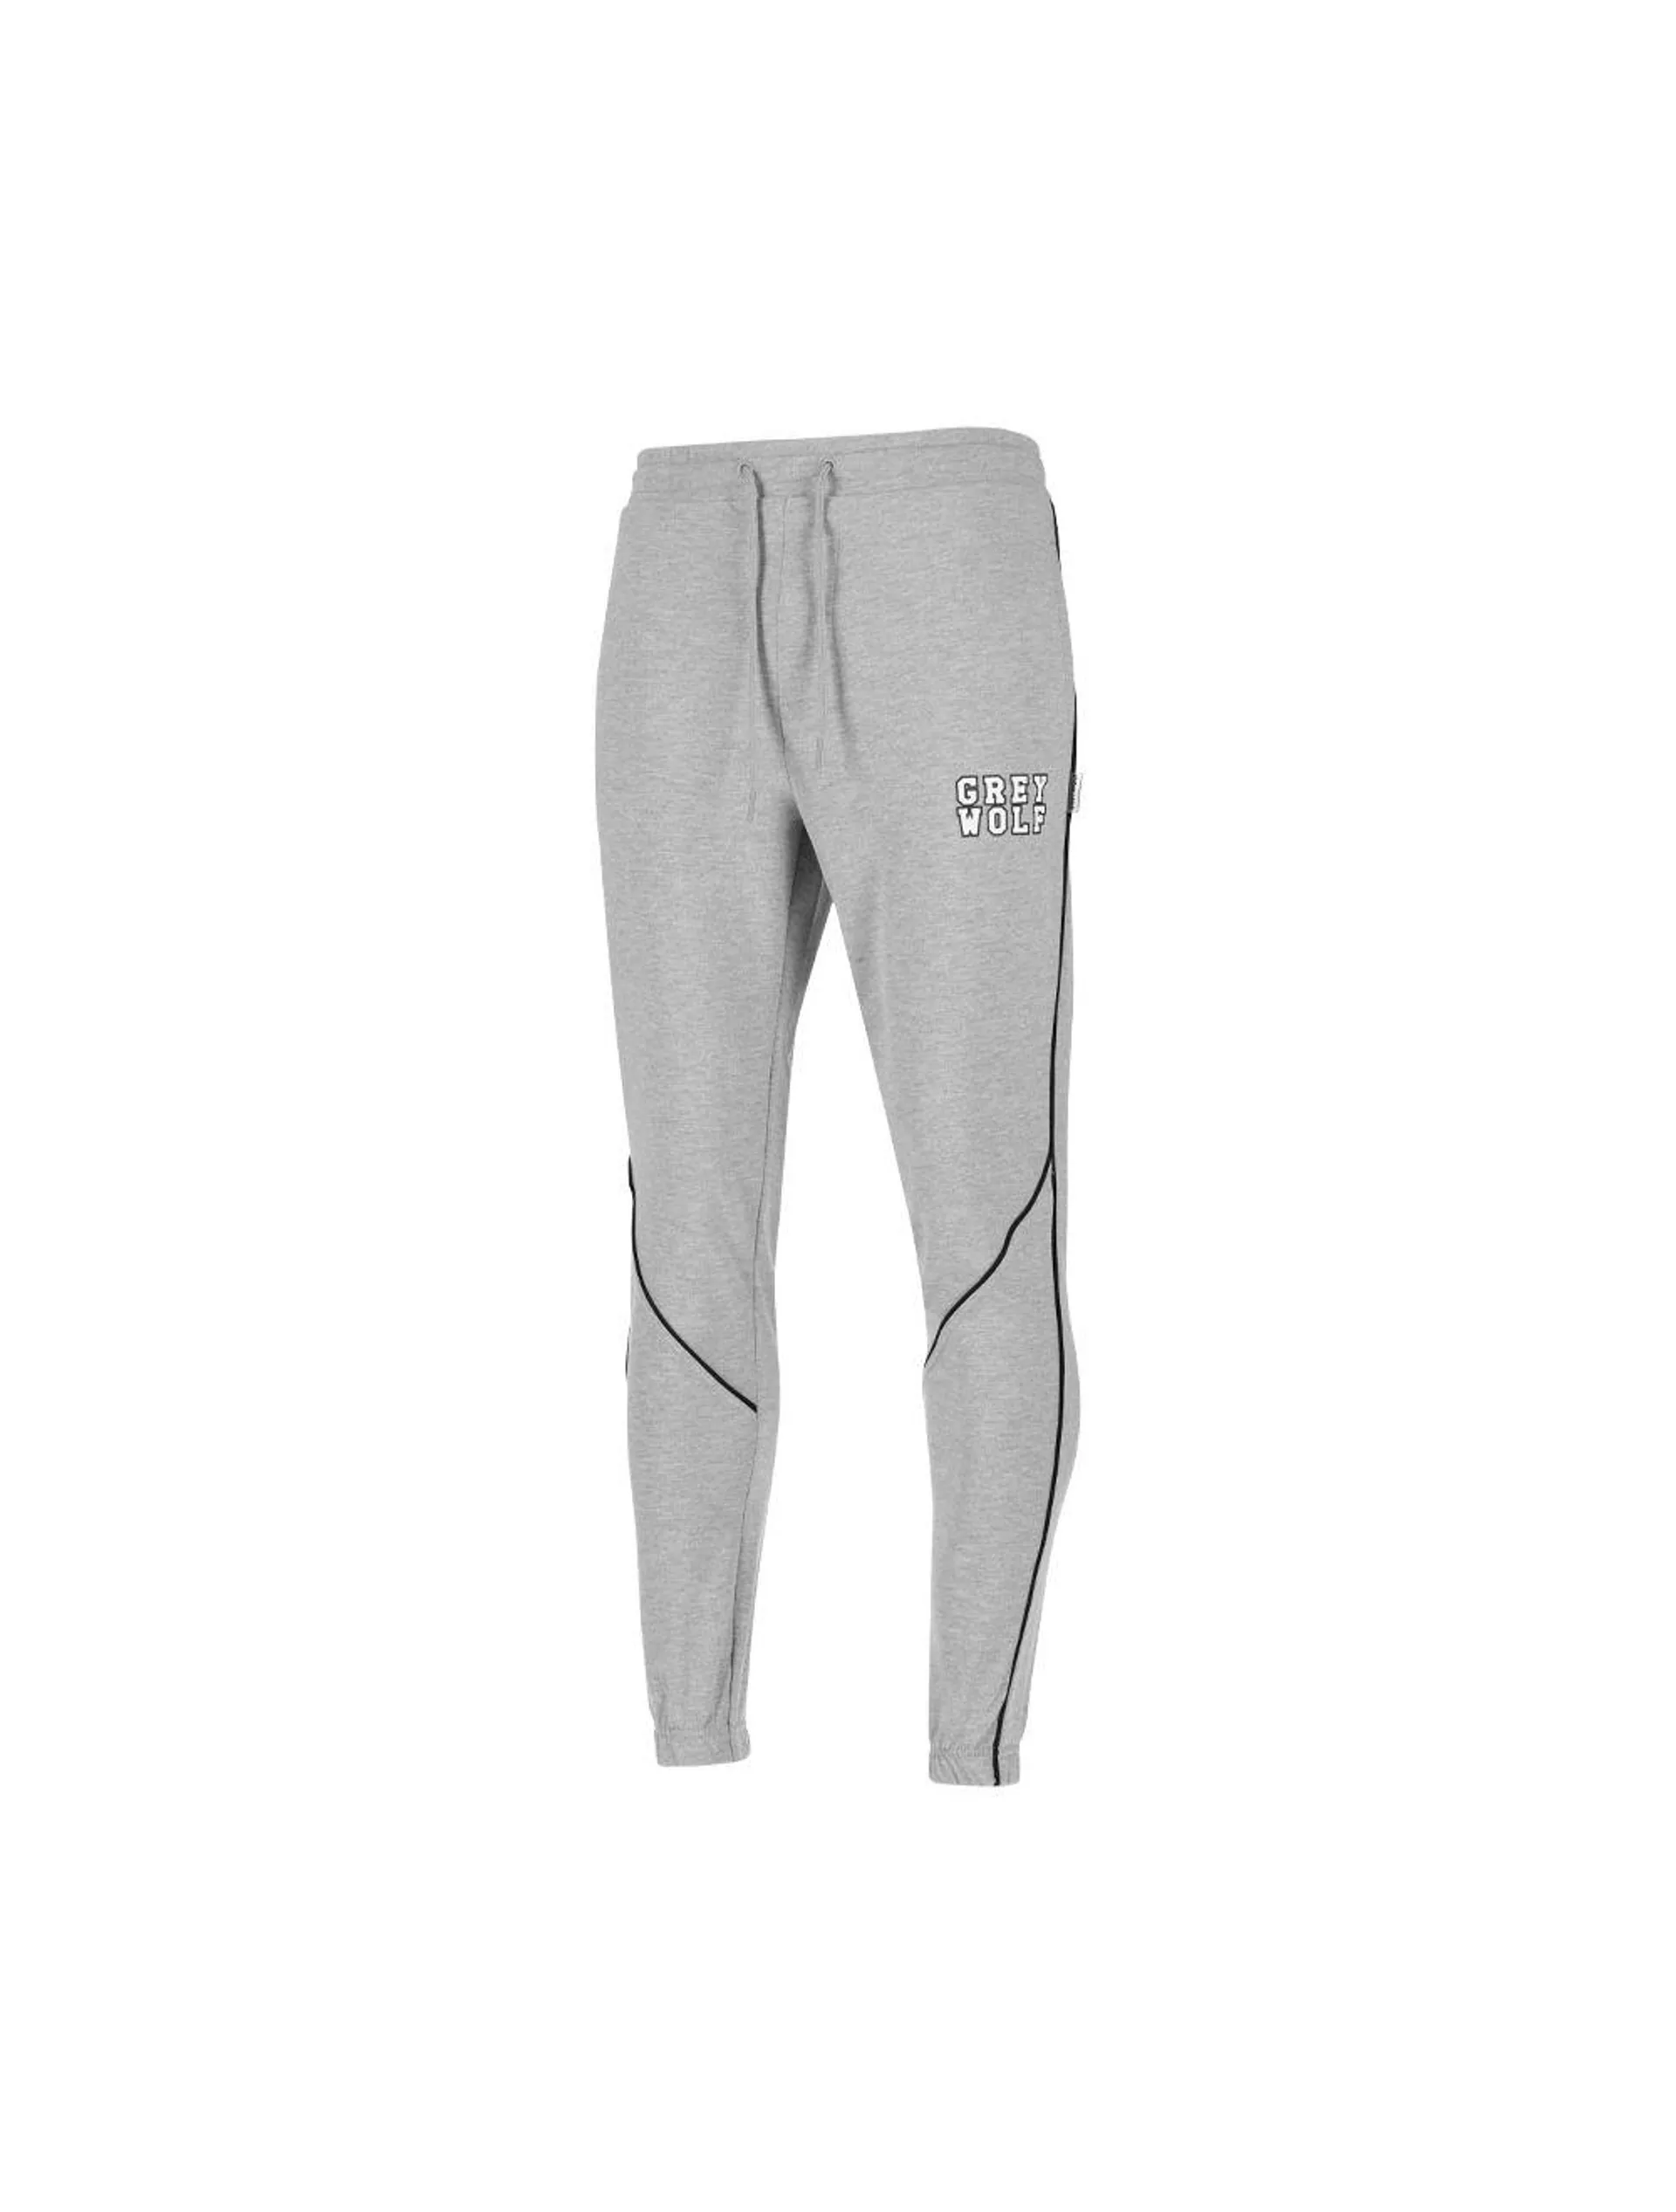 Grey Wolf College Text Track Pants Mens Grey